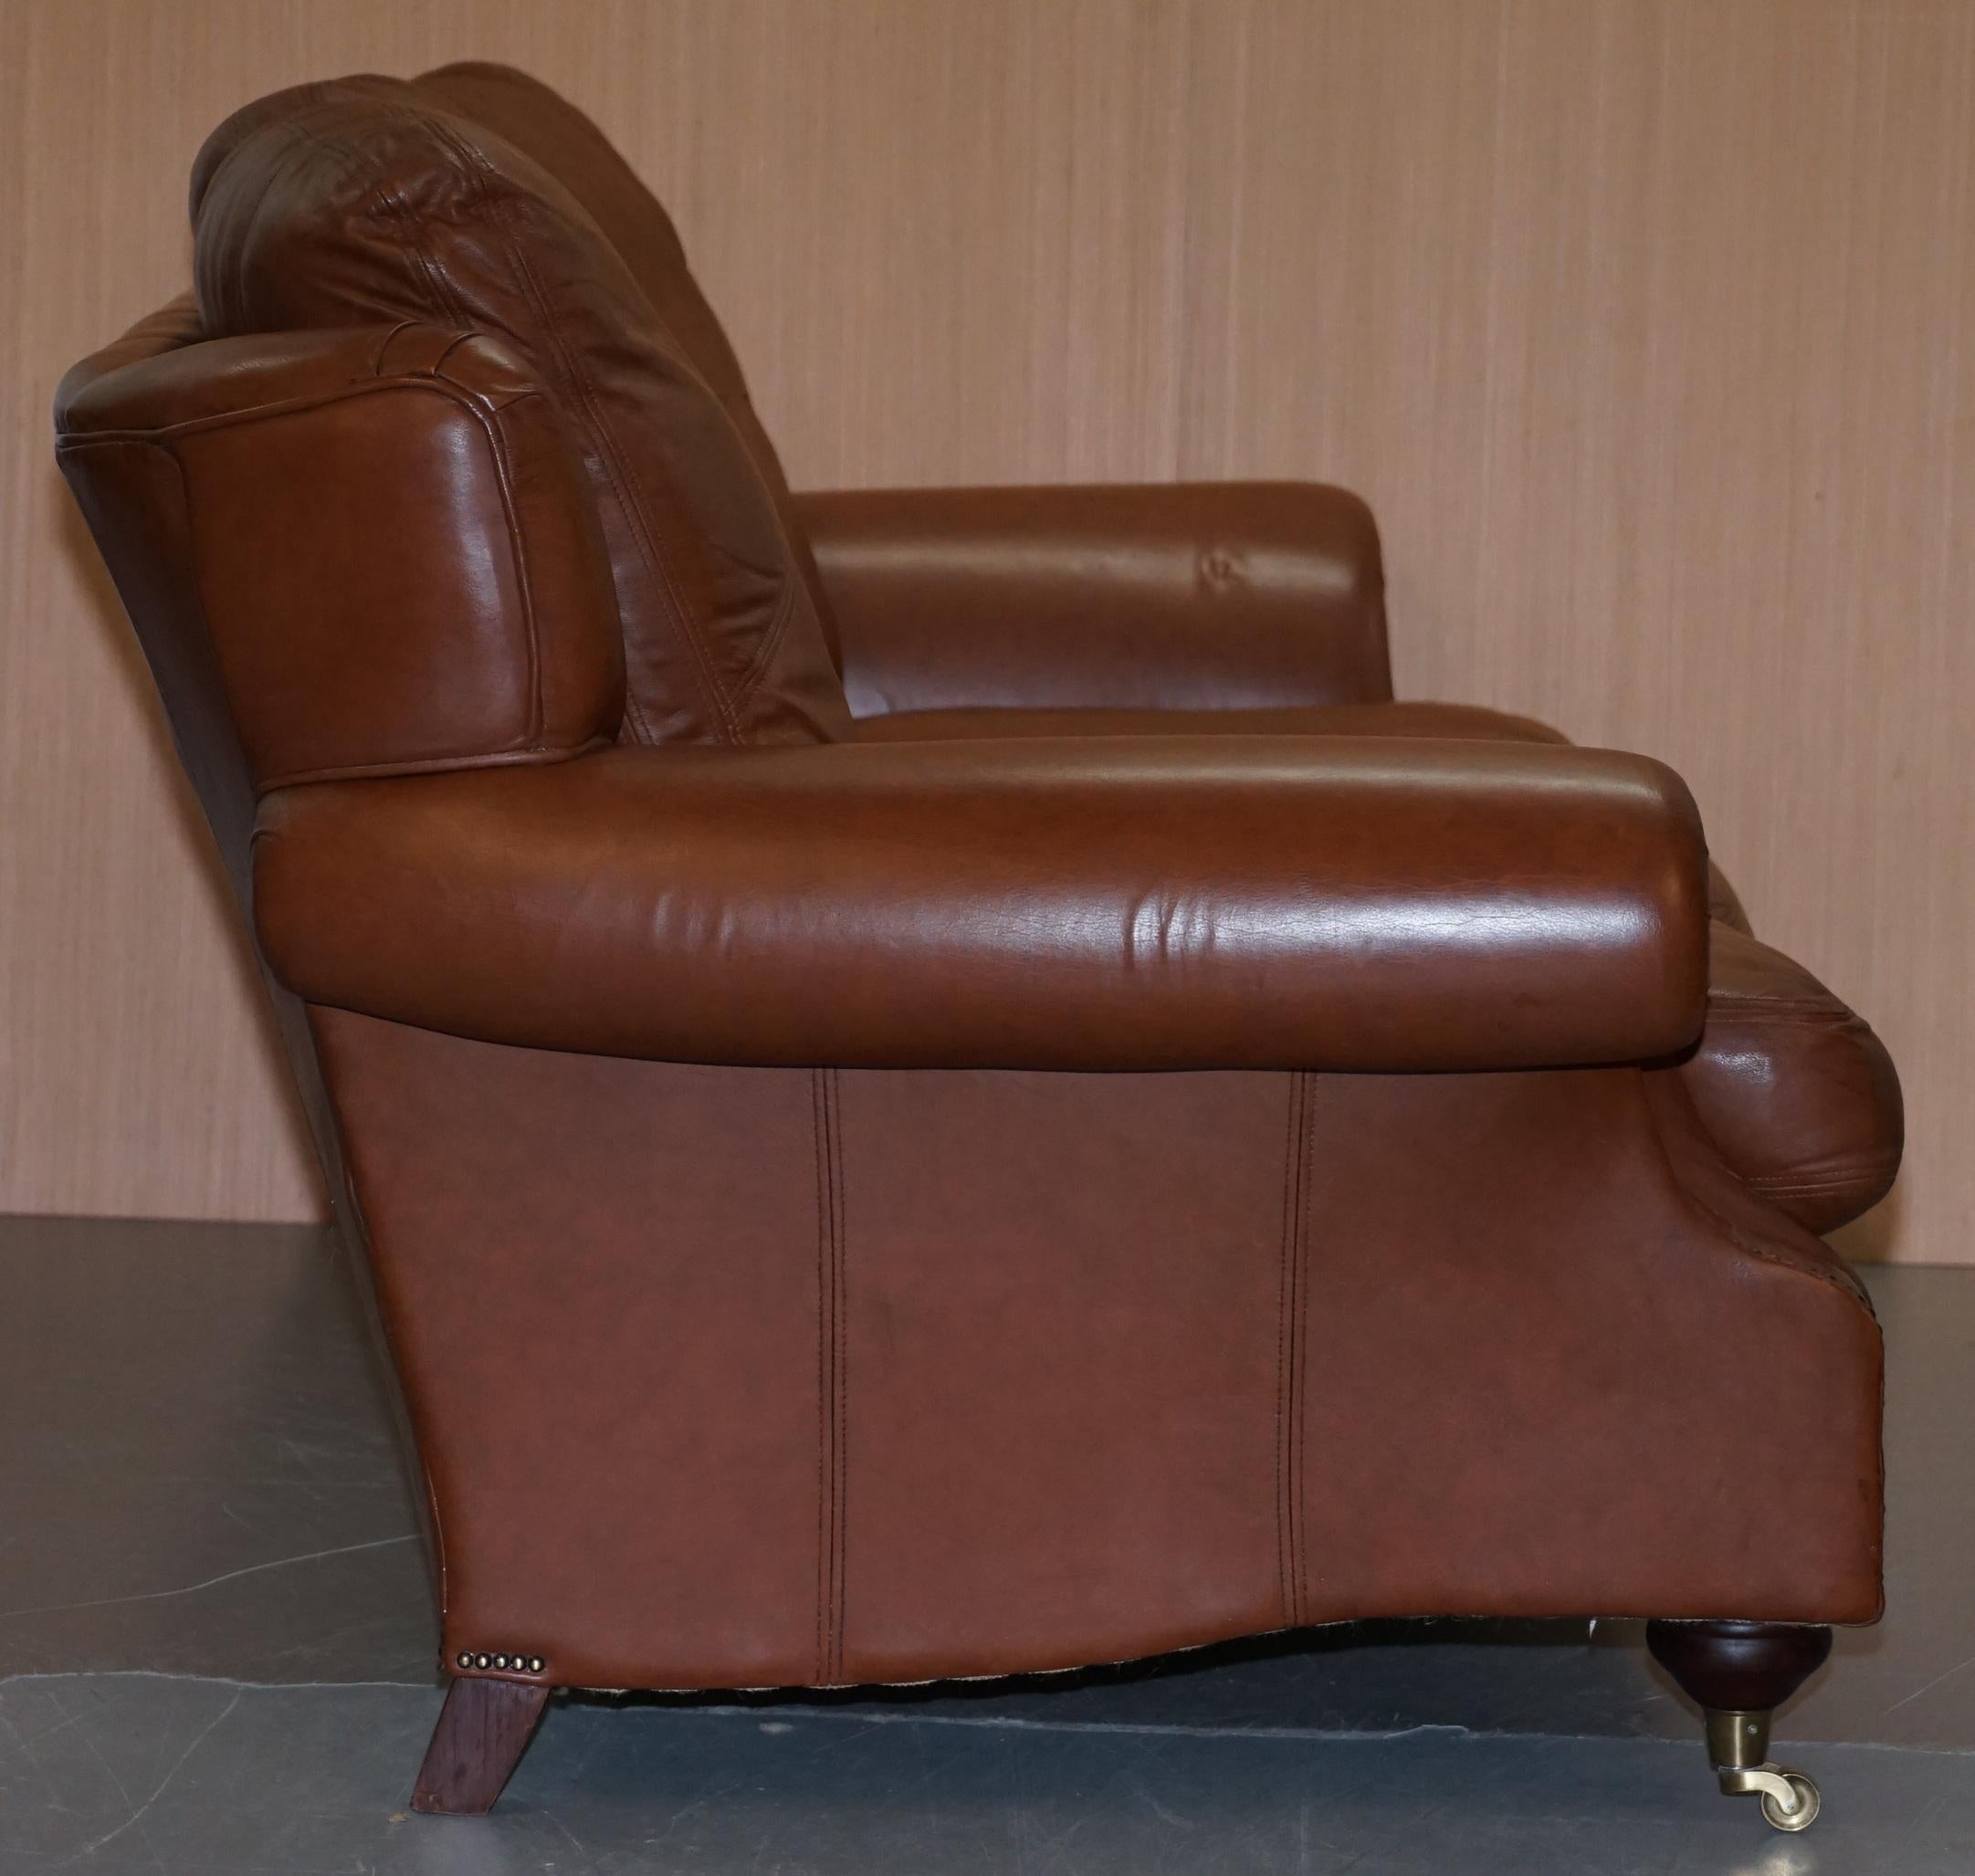 Medallion Upholstery Brown Leather Three-Seat Sofa Part of Large Suite 4